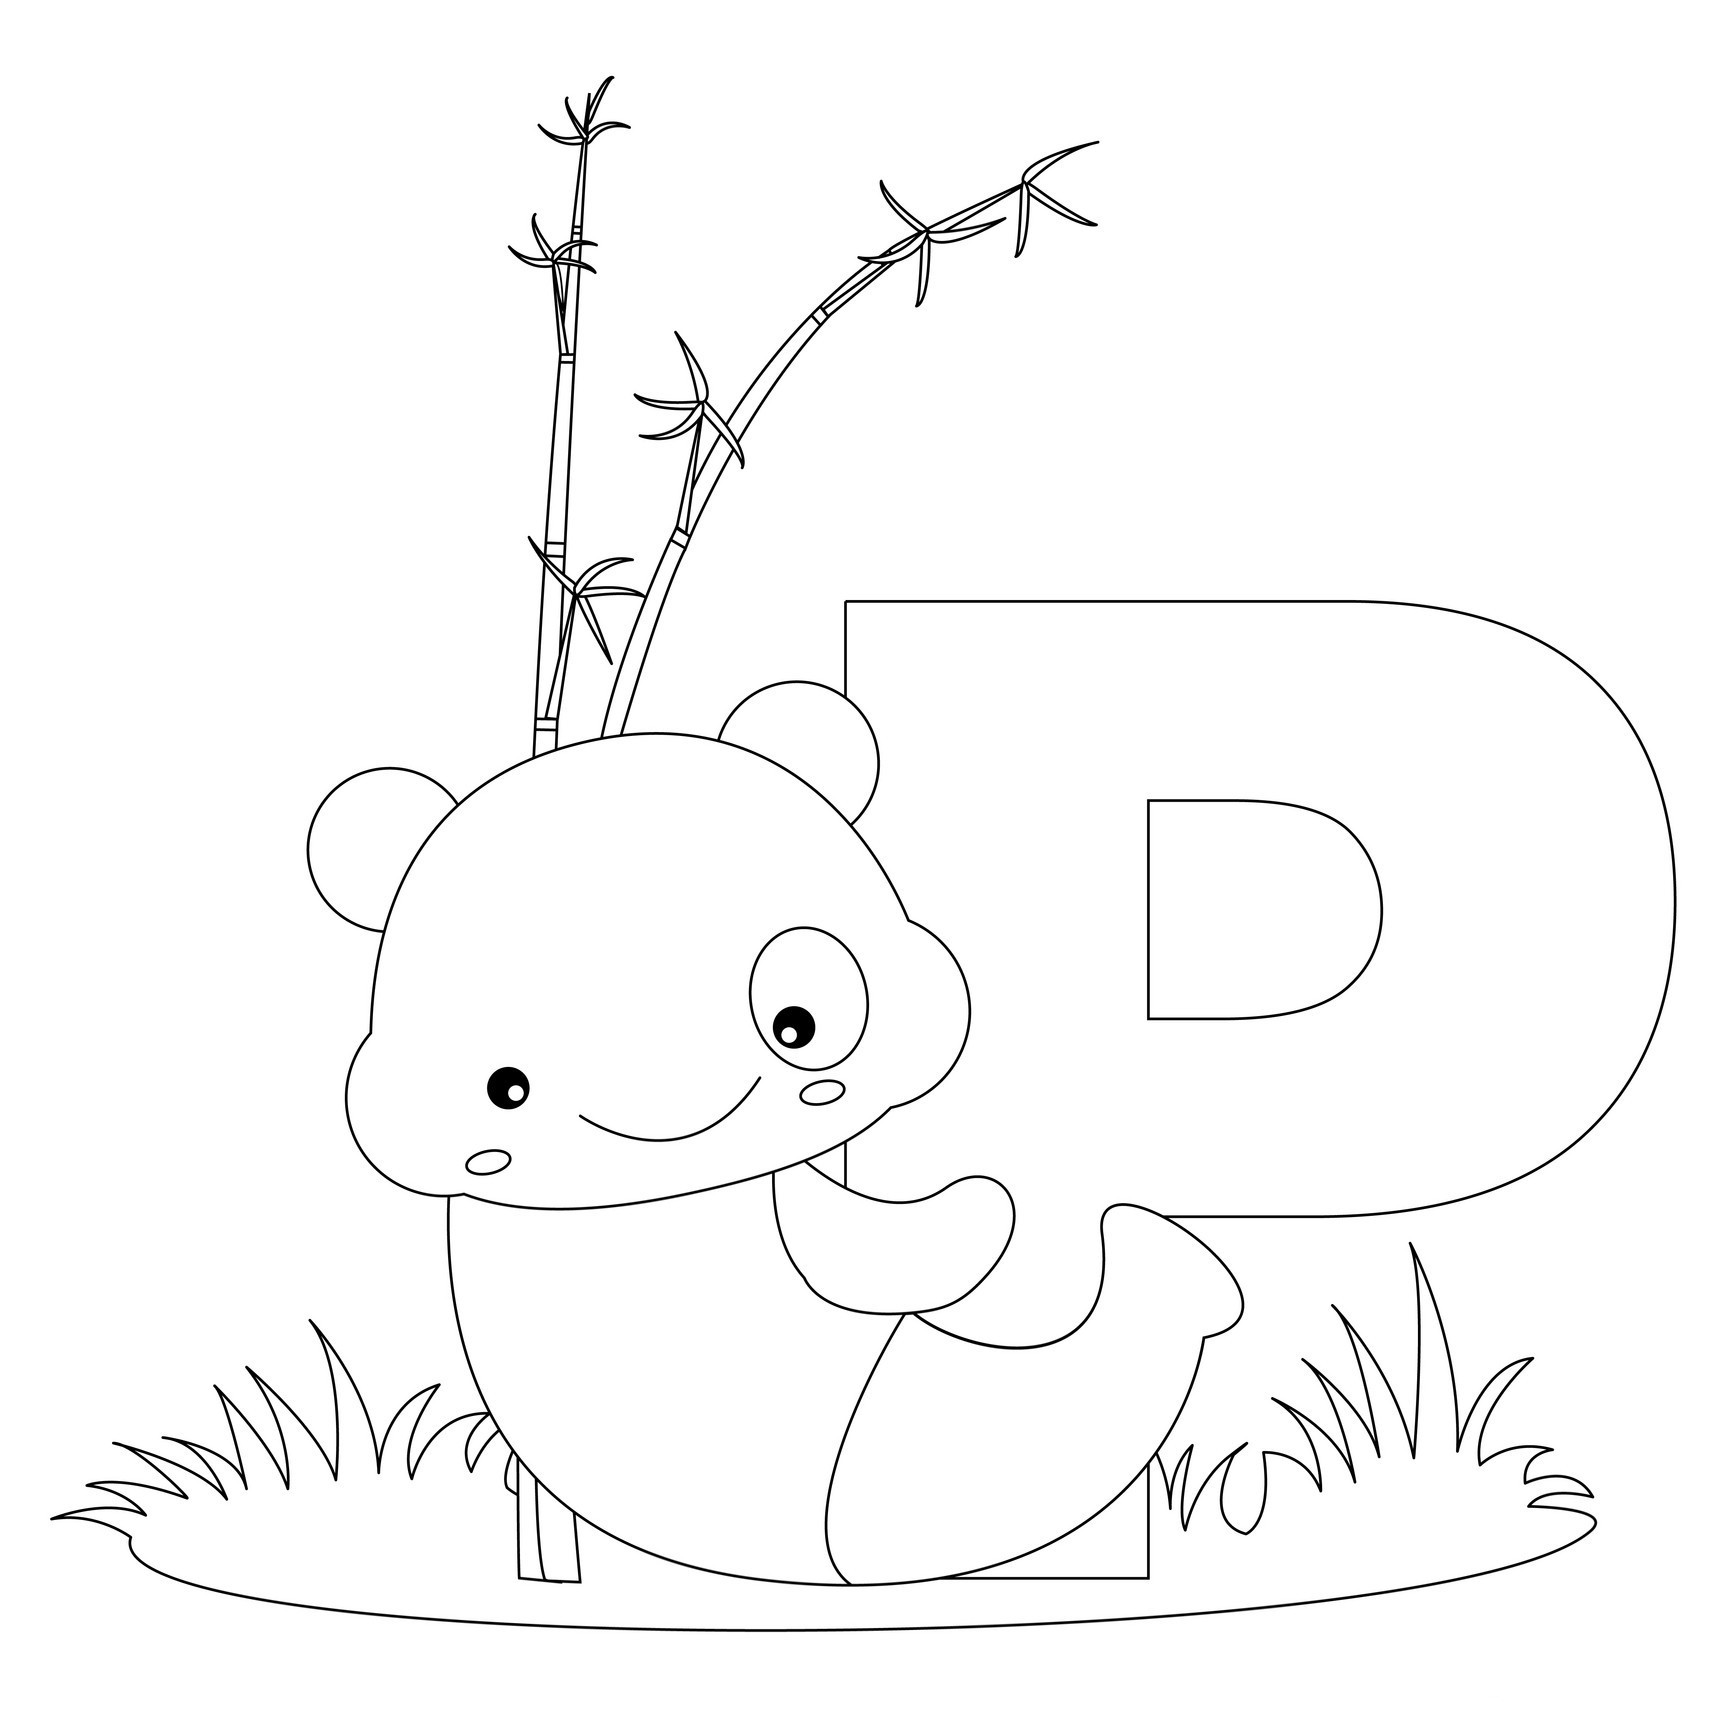 Alpahbet Coloring Pages
 Free Printable Alphabet Coloring Pages for Kids Best